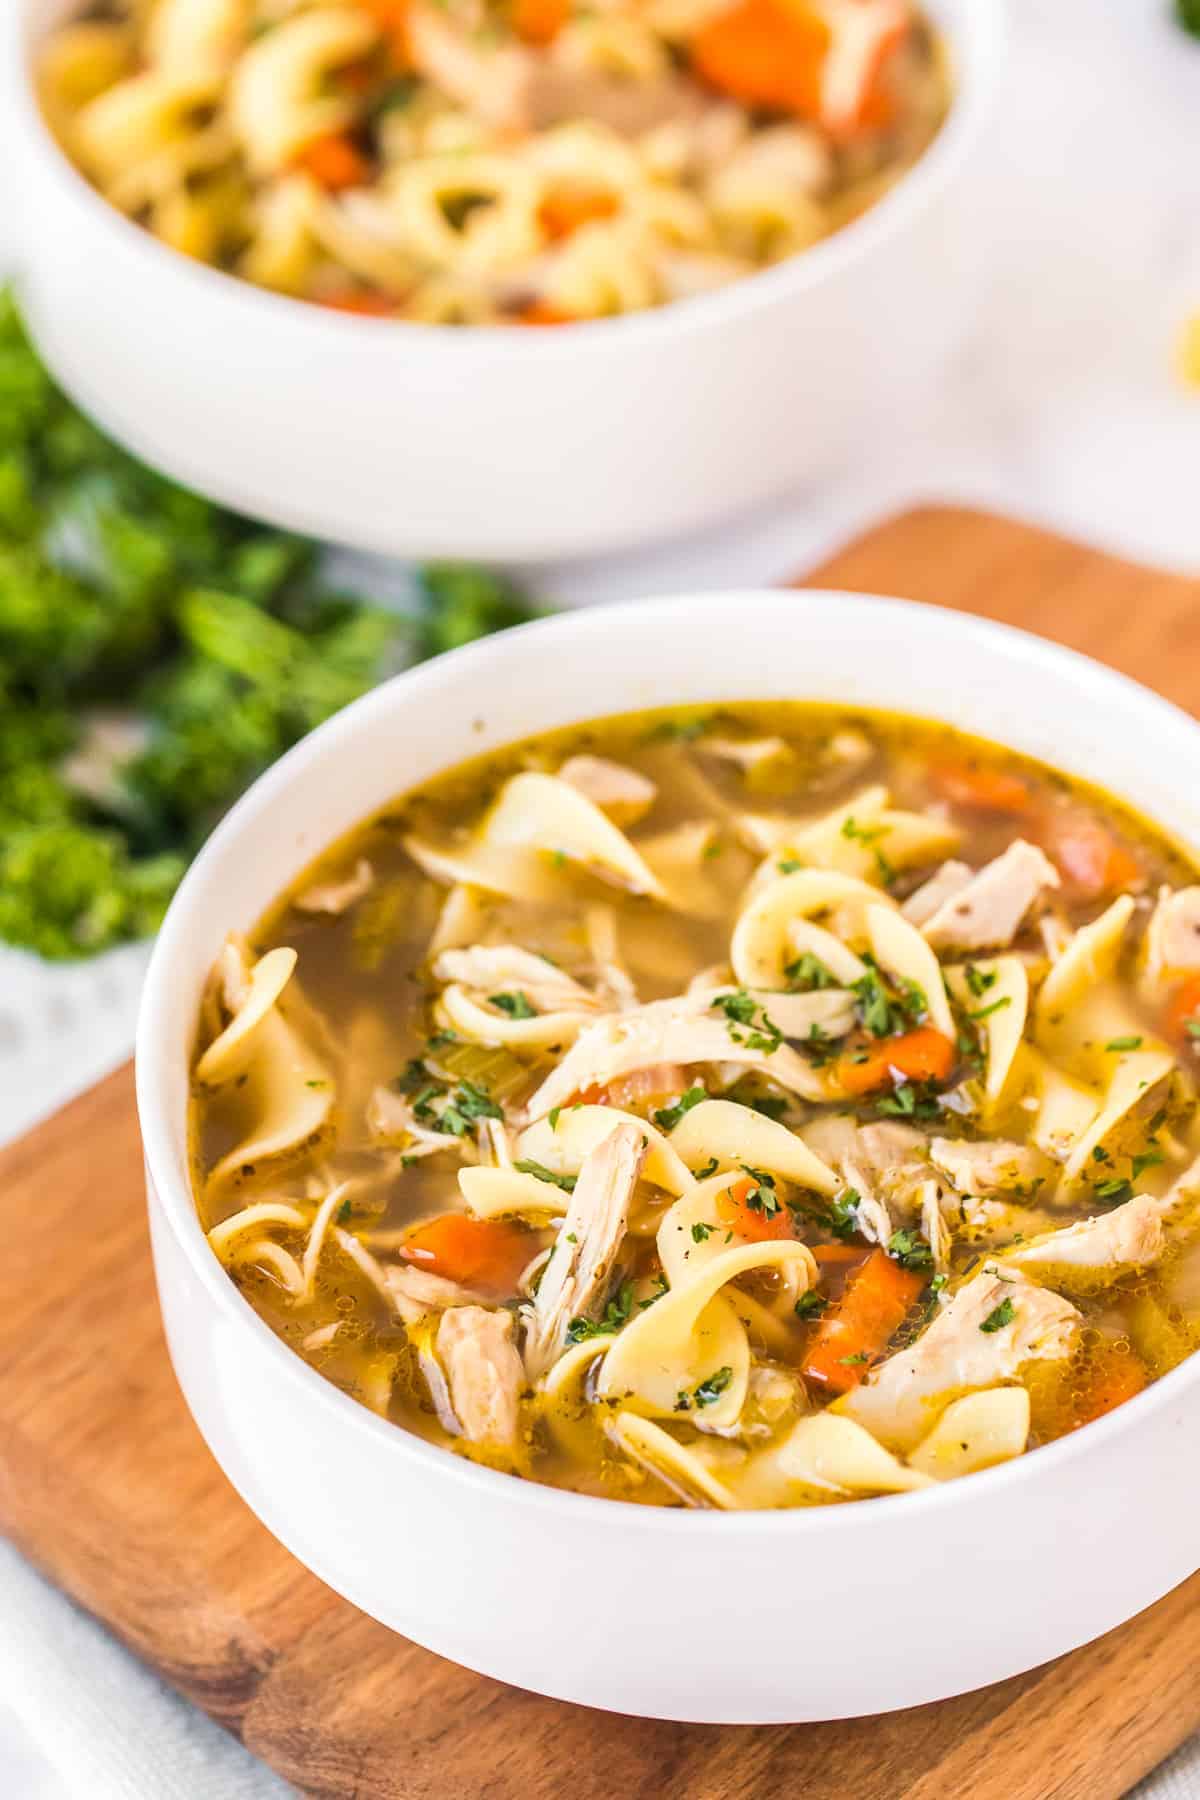 Instant Pot Chicken Noodle Soup - Easy Chicken Recipes